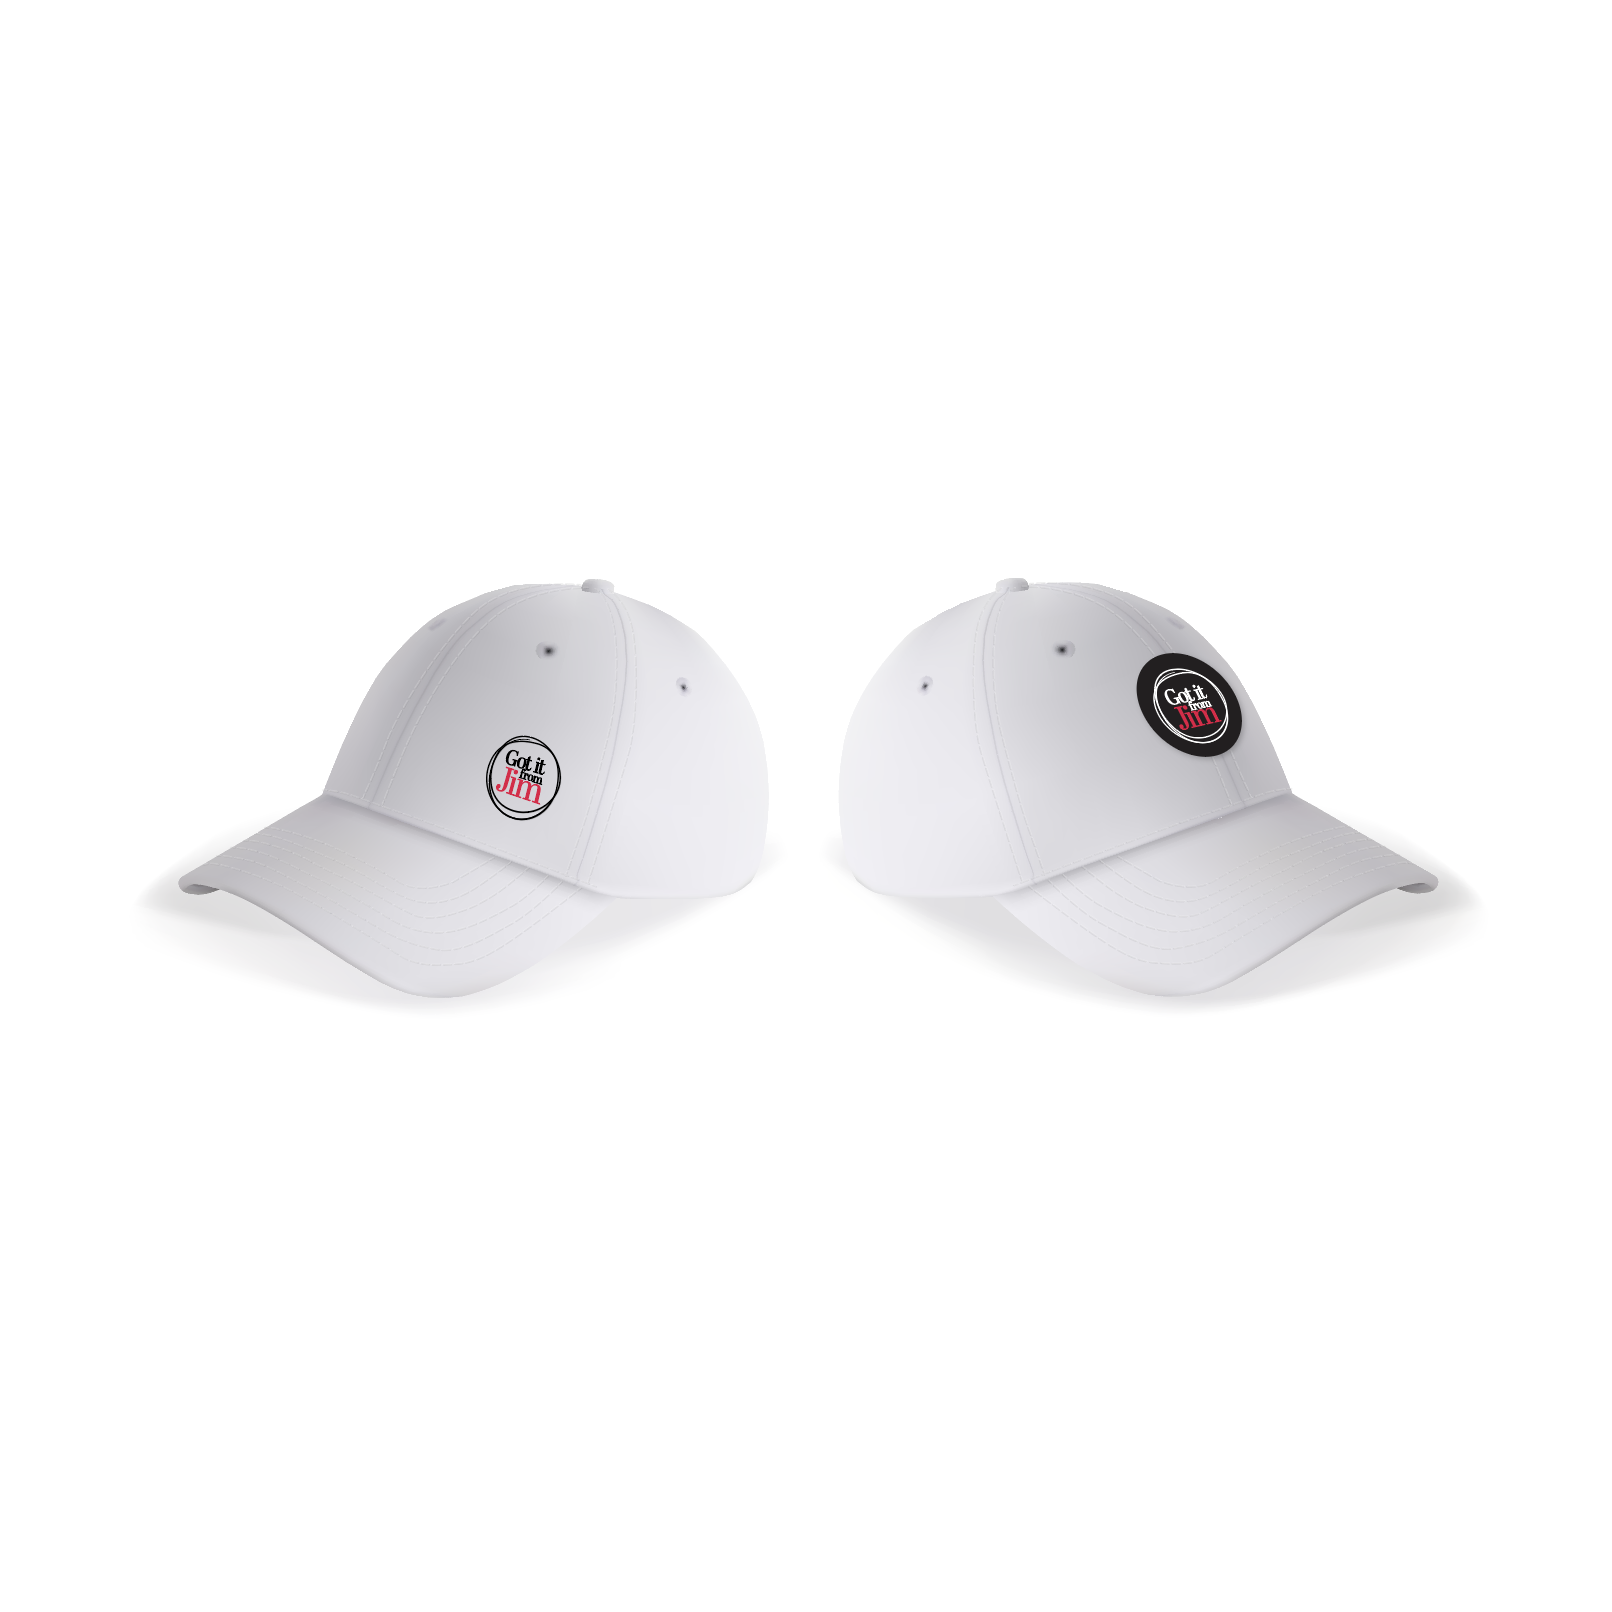 Got it from Jim hat | Brand Promotional item